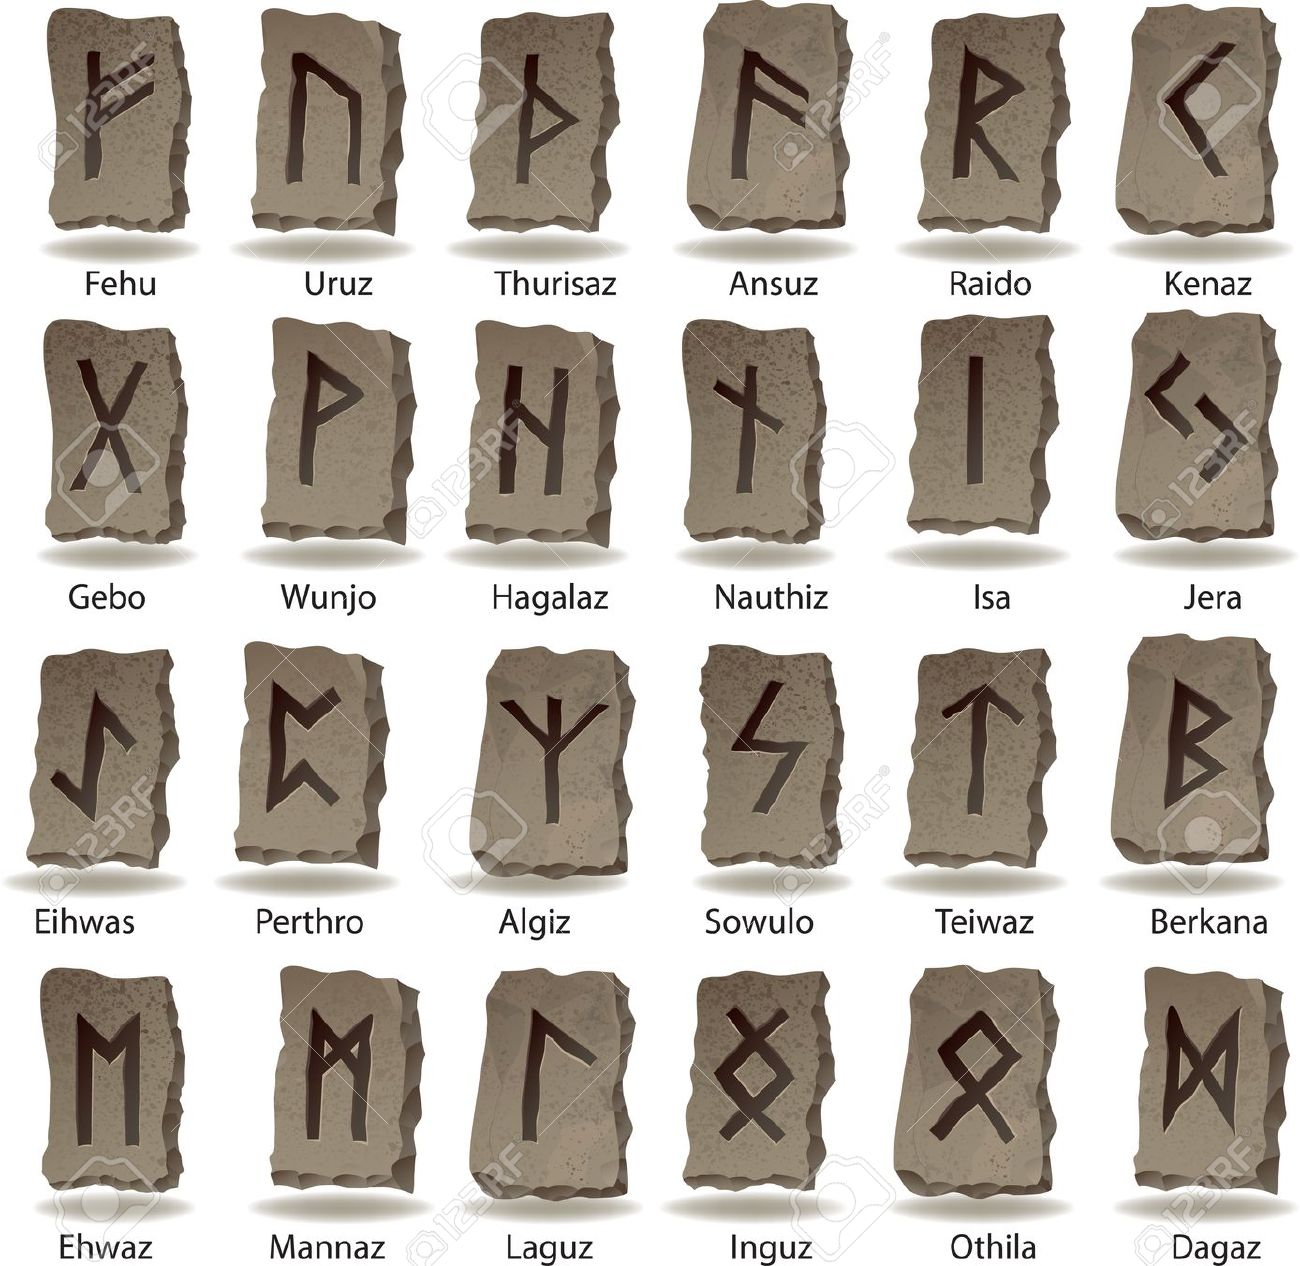 574 Runes Stock Illustrations, Cliparts And Royalty Free Runes Vectors.